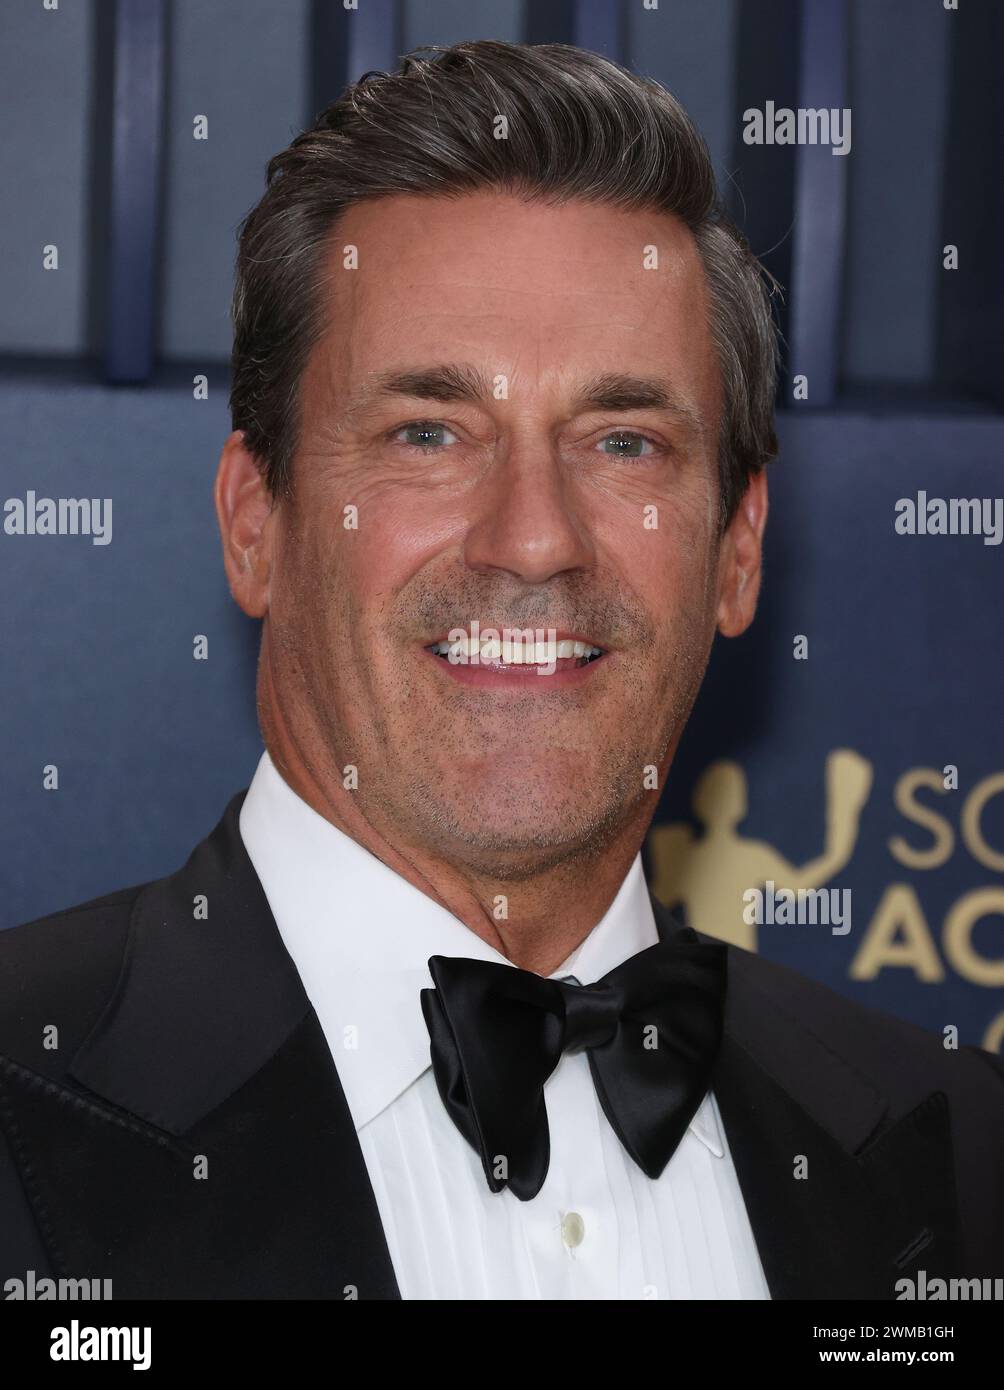 LOS ANGELES, CALIFORNIA, USA - FEBRUARY 24: Jon Hamm arrives at the 30th Annual Screen Actors Guild Awards held at the Shrine Auditorium and Expo Hall on February 24, 2024 in Los Angeles, California, United States. (Photo by Xavier Collin/Image Press Agency) Stock Photo